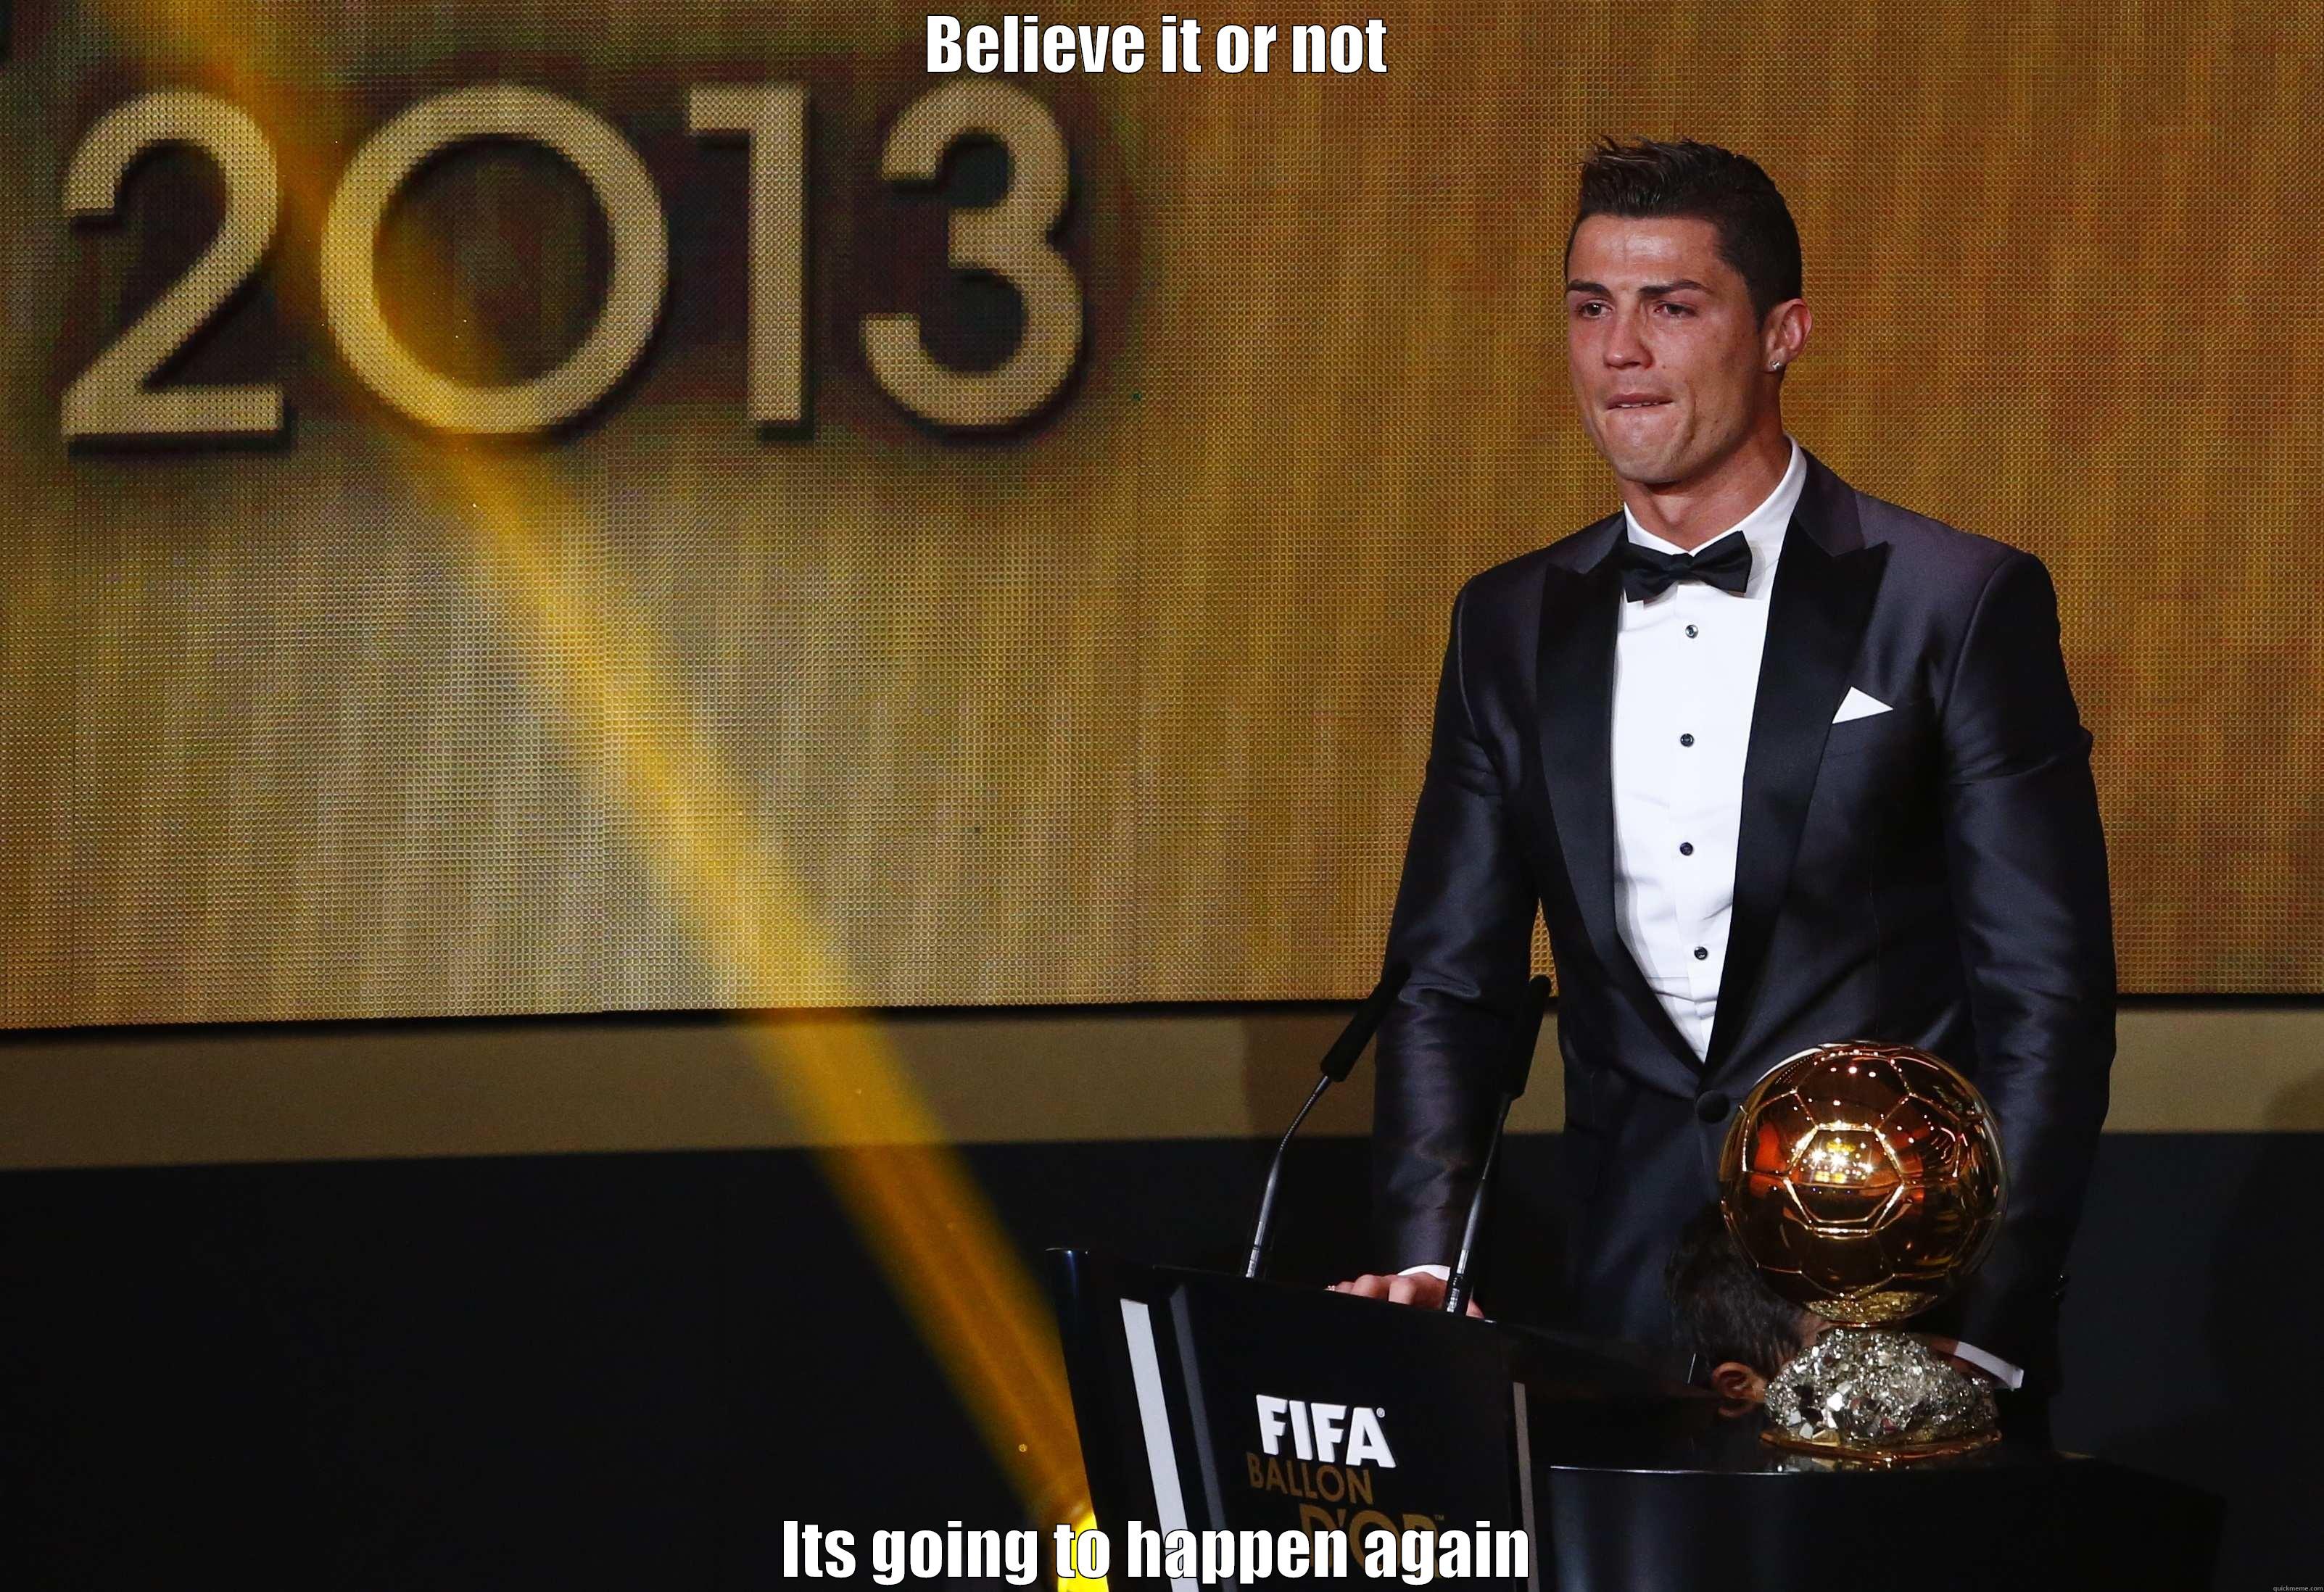 cr7 best of the world  - BELIEVE IT OR NOT ITS GOING TO HAPPEN AGAIN Misc